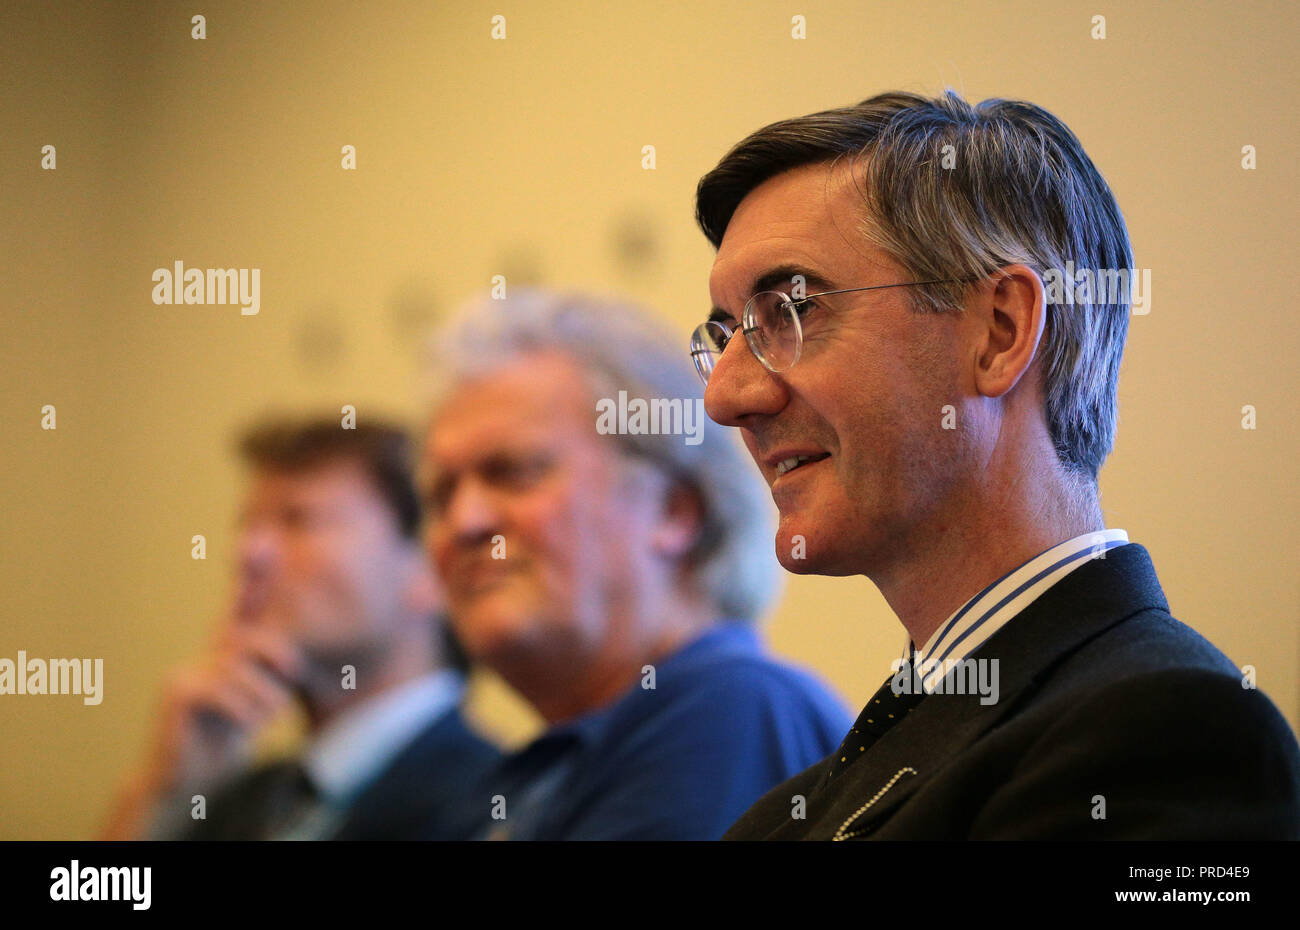 Jacob Rees-Mogg MP arrives at the Novotel Birmingham Centre for a Leave means Leave event, during the Conservative Party annual conference in Birmingham. Stock Photo